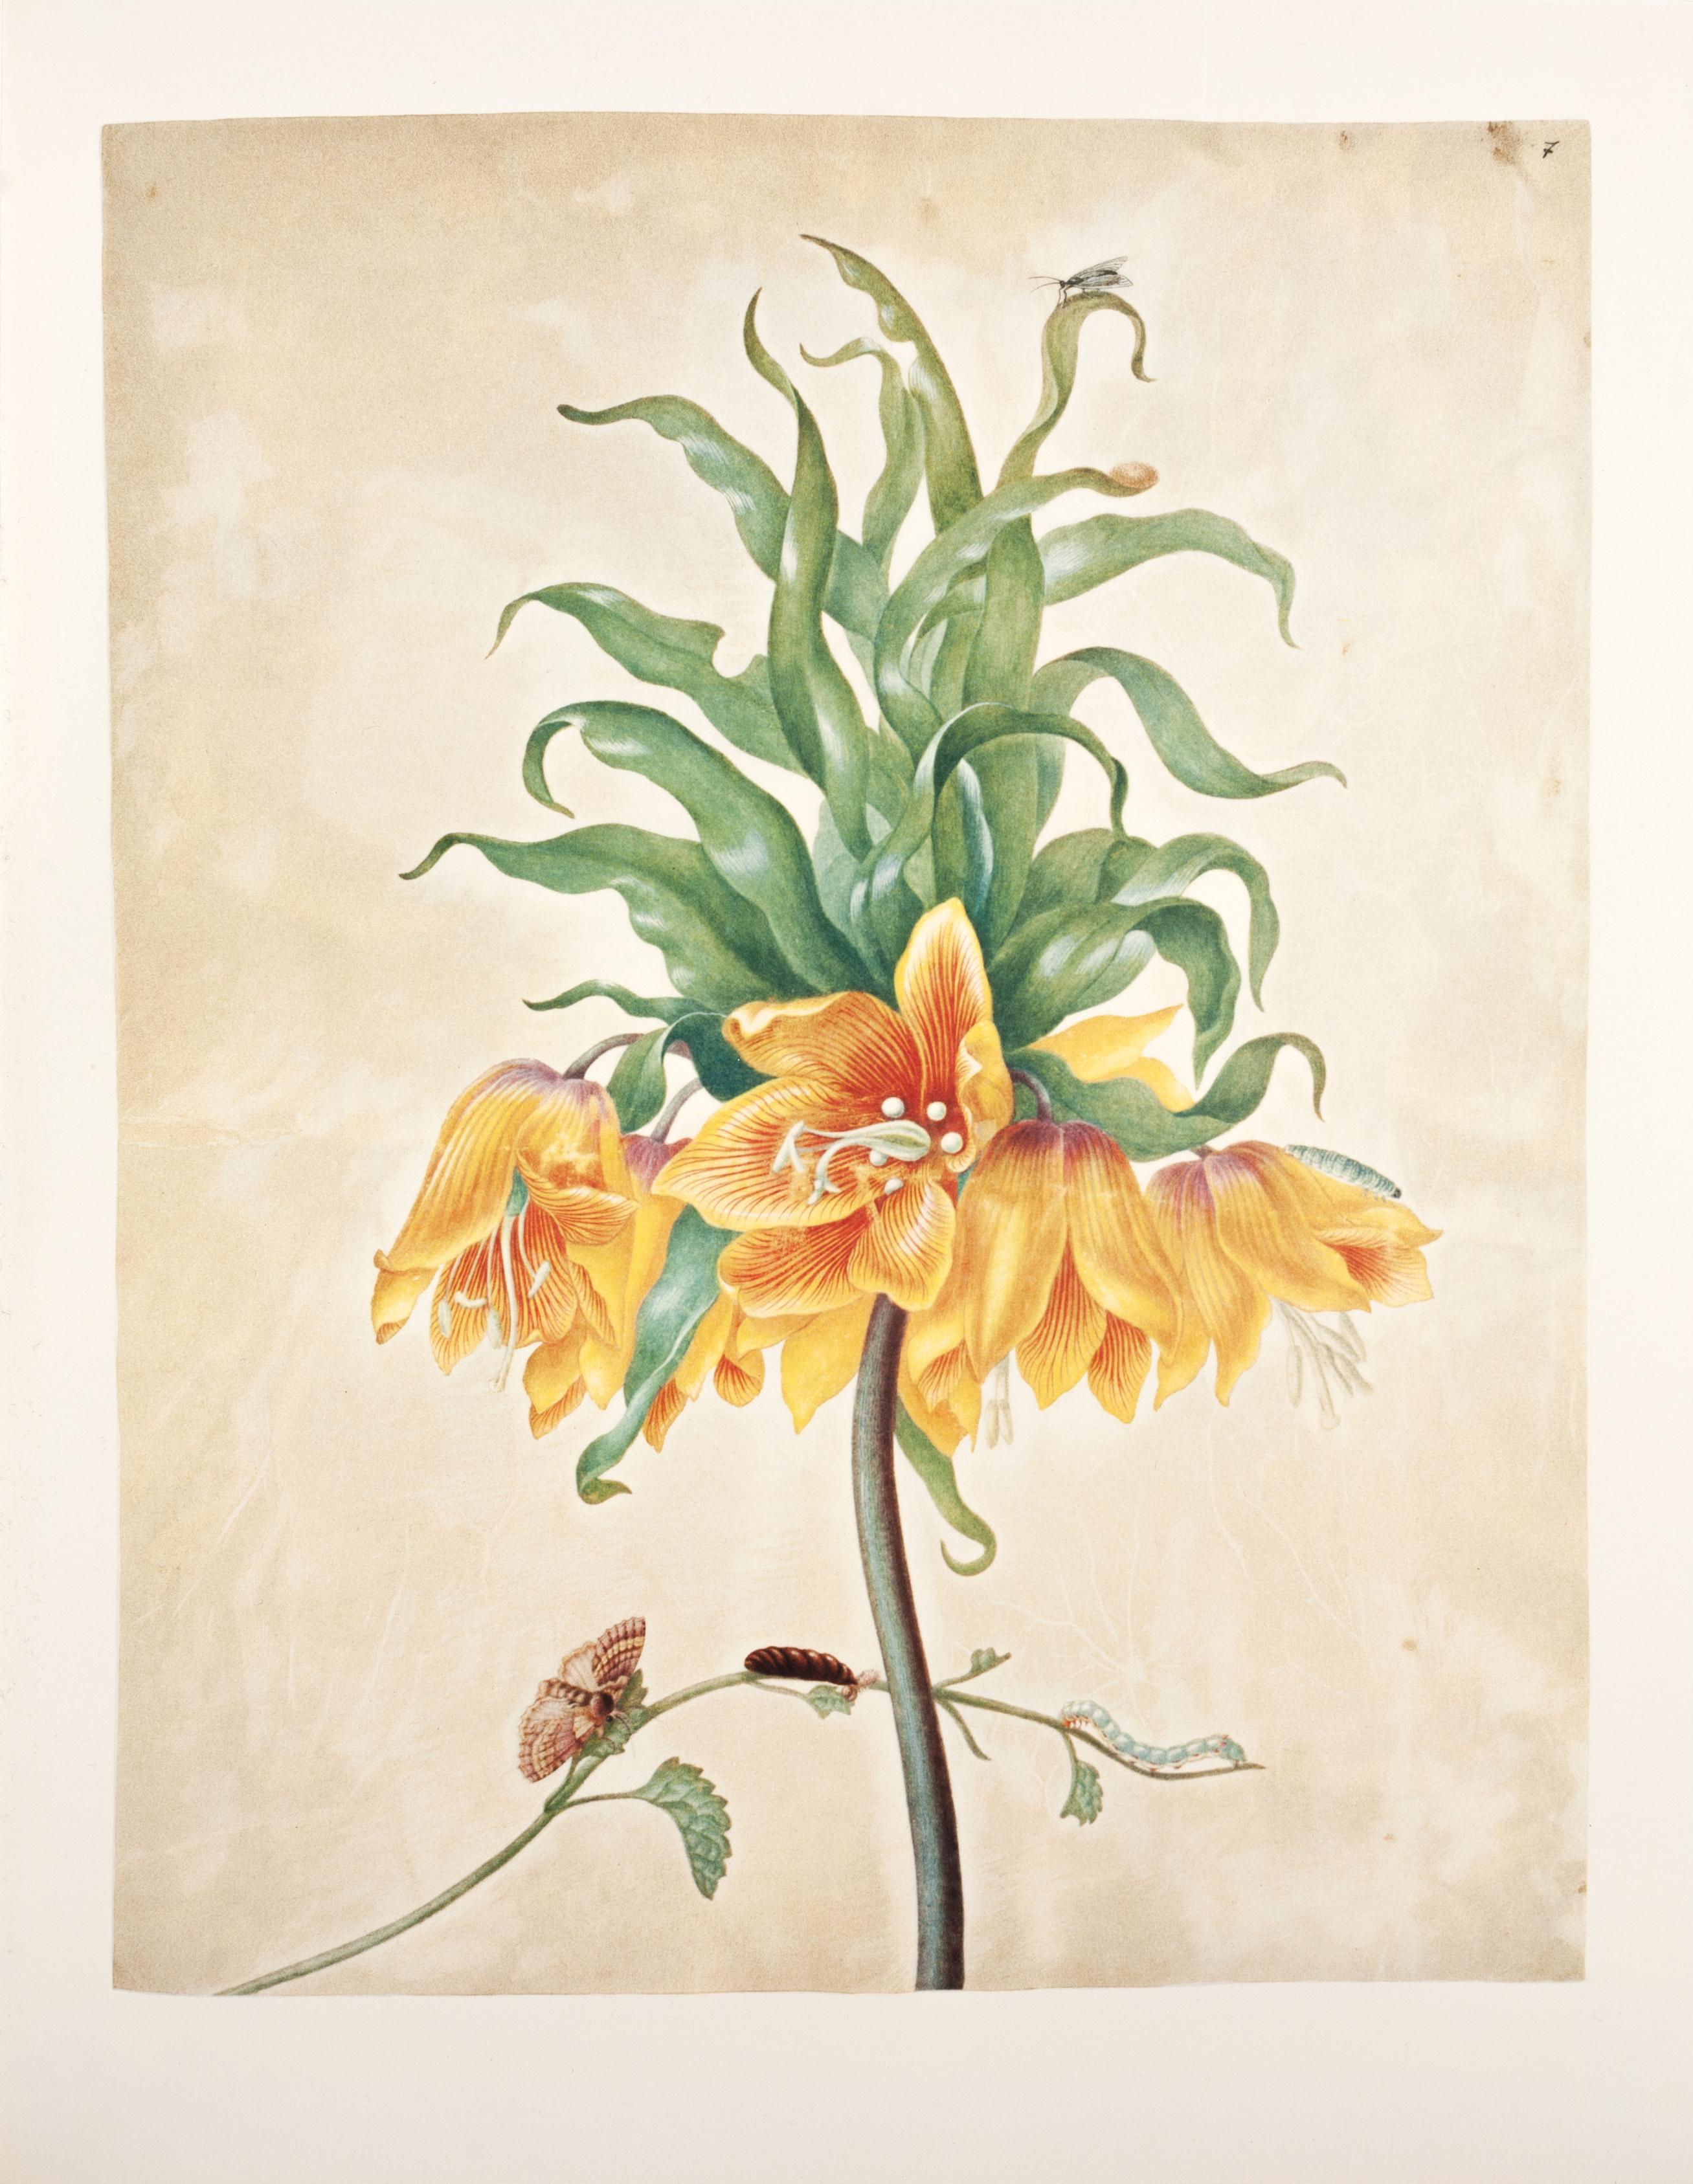 6. Crown Imperial, Yellow archangel, Prominent - Print by Maria Sybilla Merian